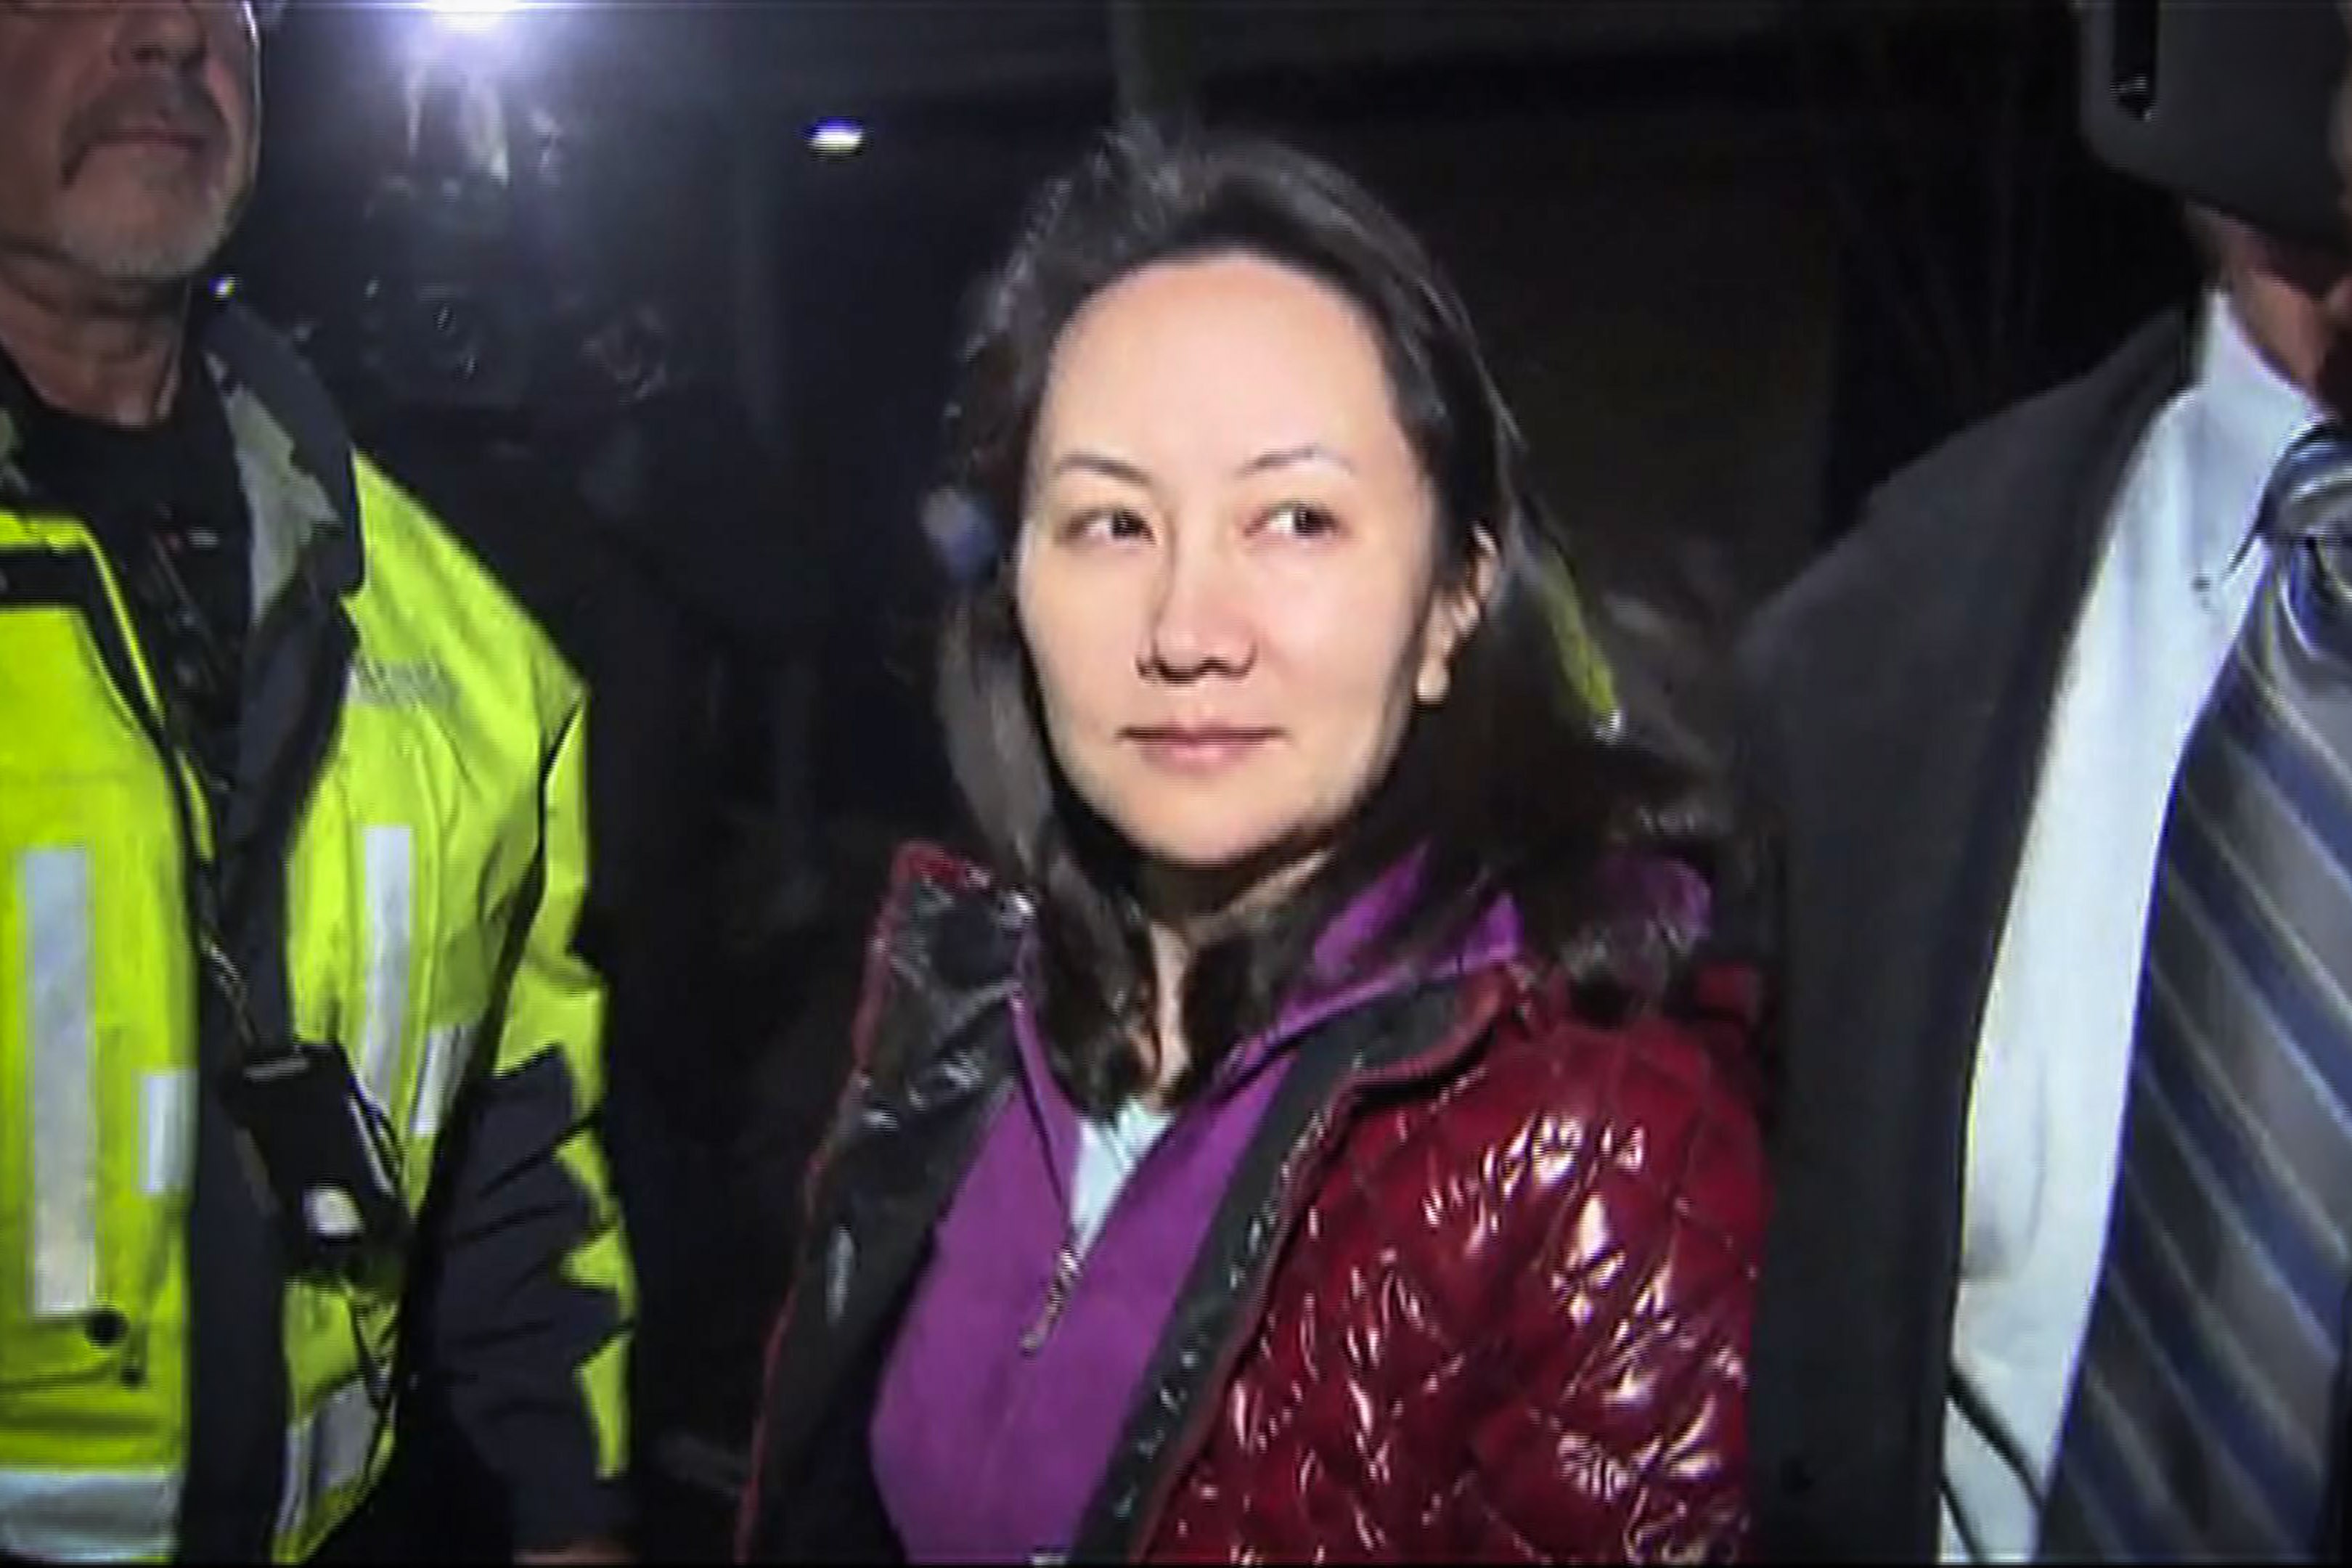 Huawei CFO Meng Wanzhou exits the court registry following her bail hearing at British Columbia Superior Court in Vancouver on December 11. Huawei, founded in 1987 by a former officer of the Chinese People's Liberation Army, has come under increased scrutiny of late for its relations with the Beijing government. Photo: CTV Television Network/AFP